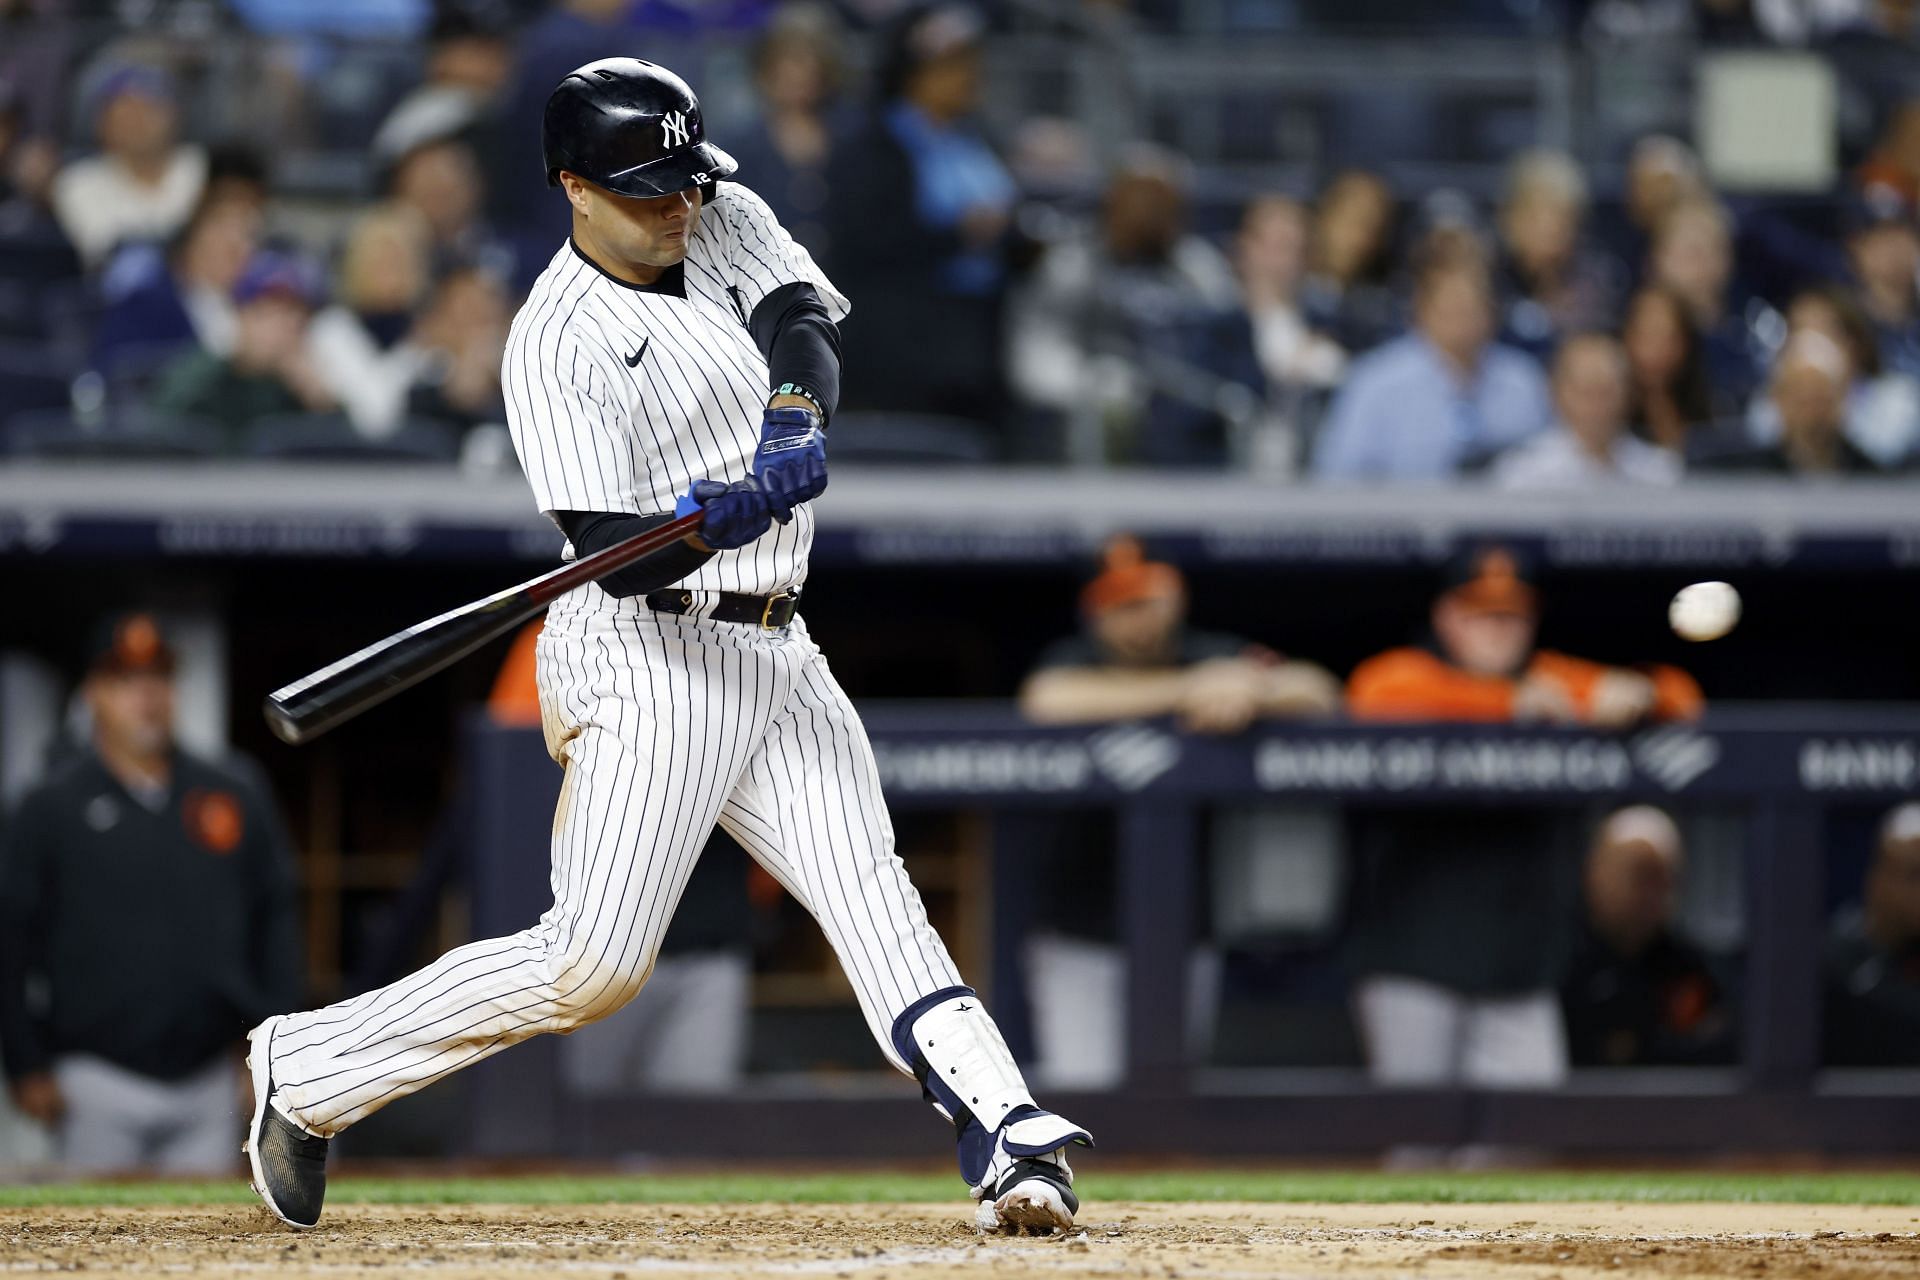 Yankees' Isiah Kiner-Falefa reaches deal to remain in the Bronx